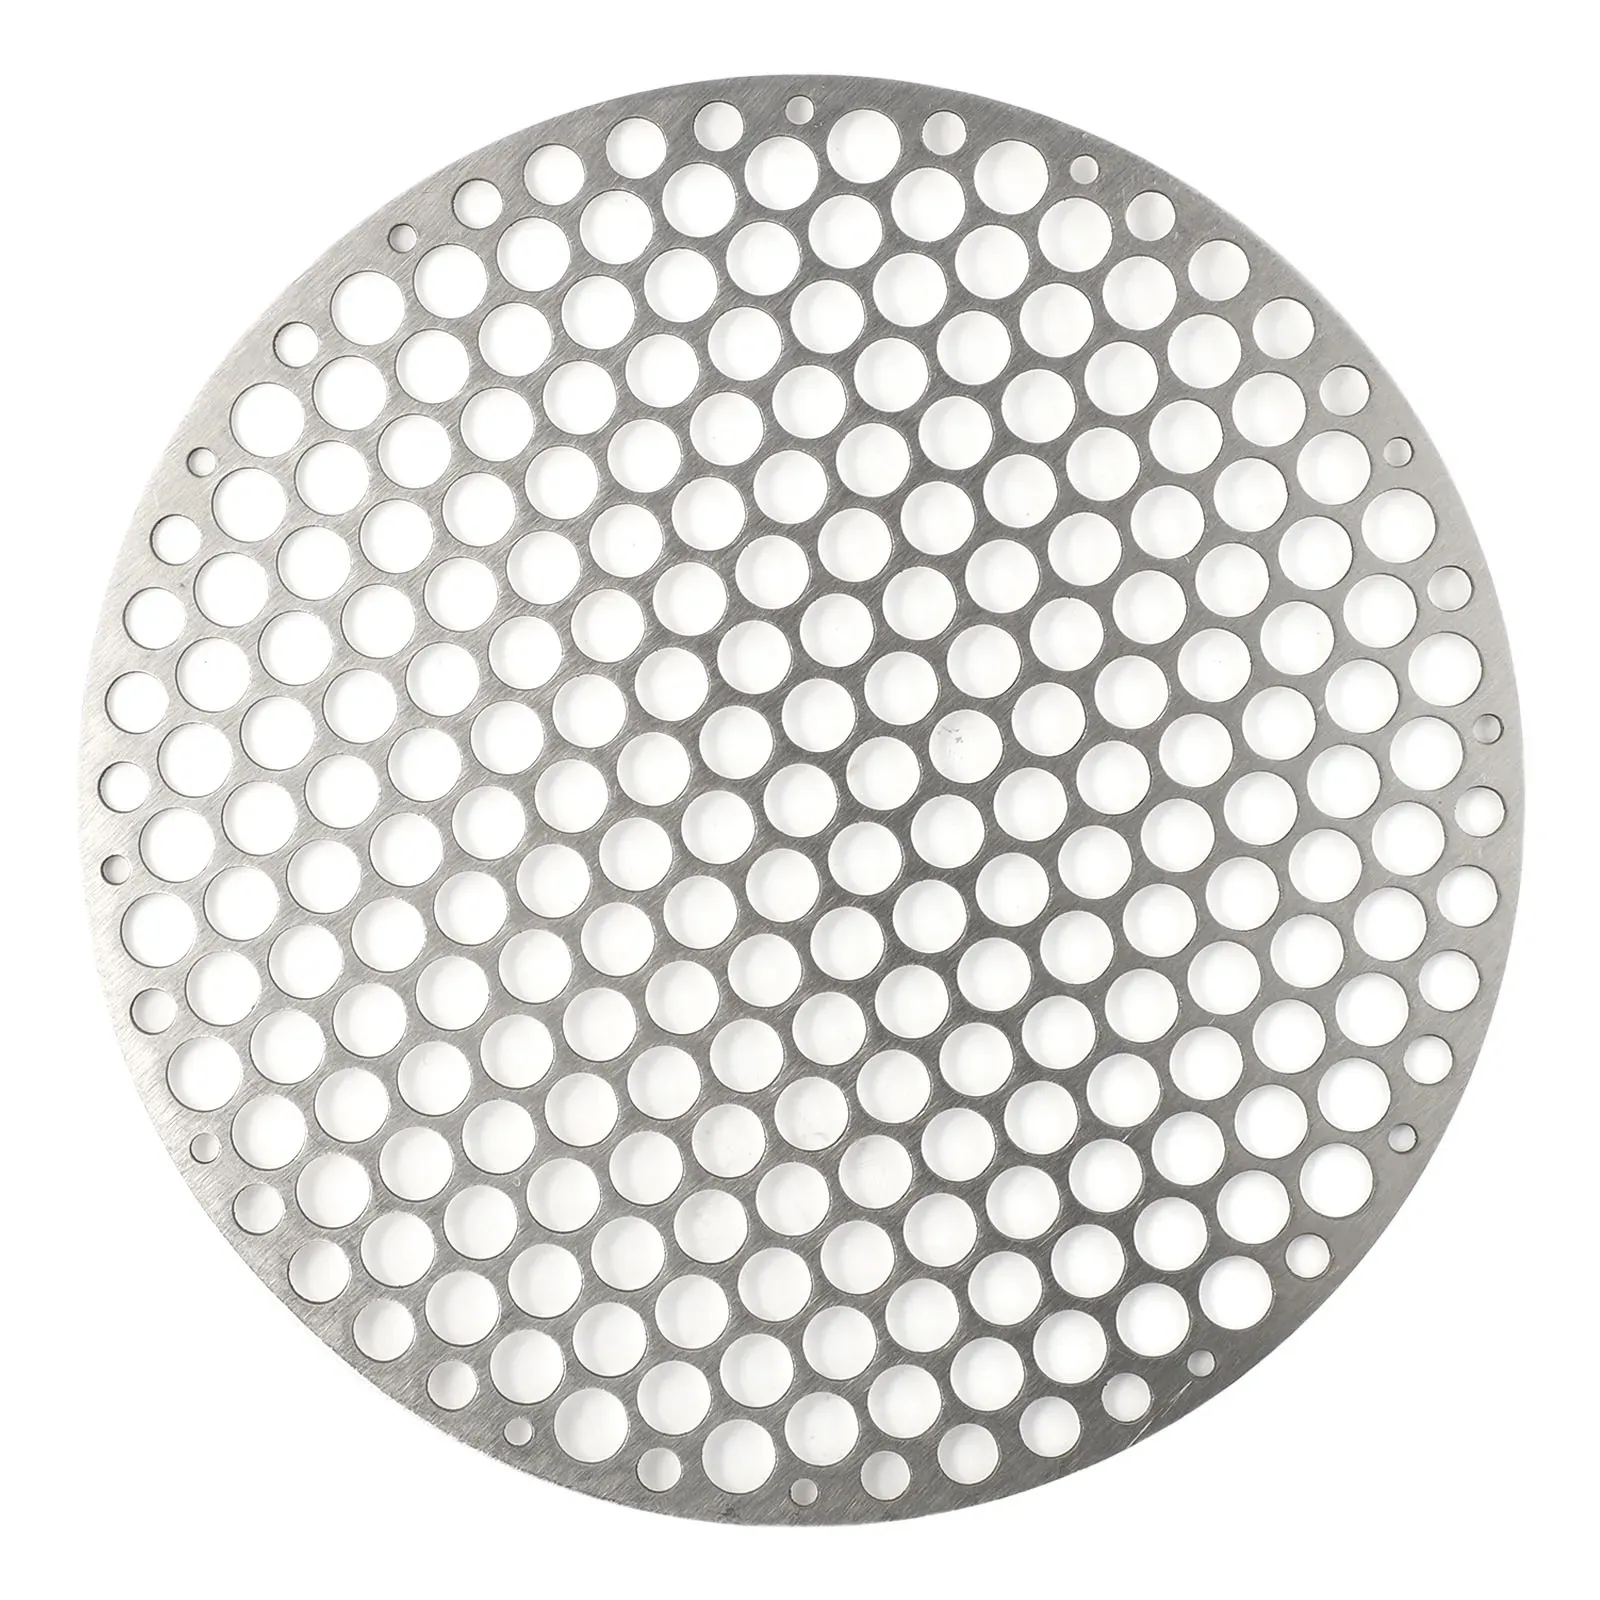 Accessories Stainless Steel Round Grill Net BBQ Mat Carbon Furnace Steam Nets Barbecue Rack Portable Folding Barbecue Grill